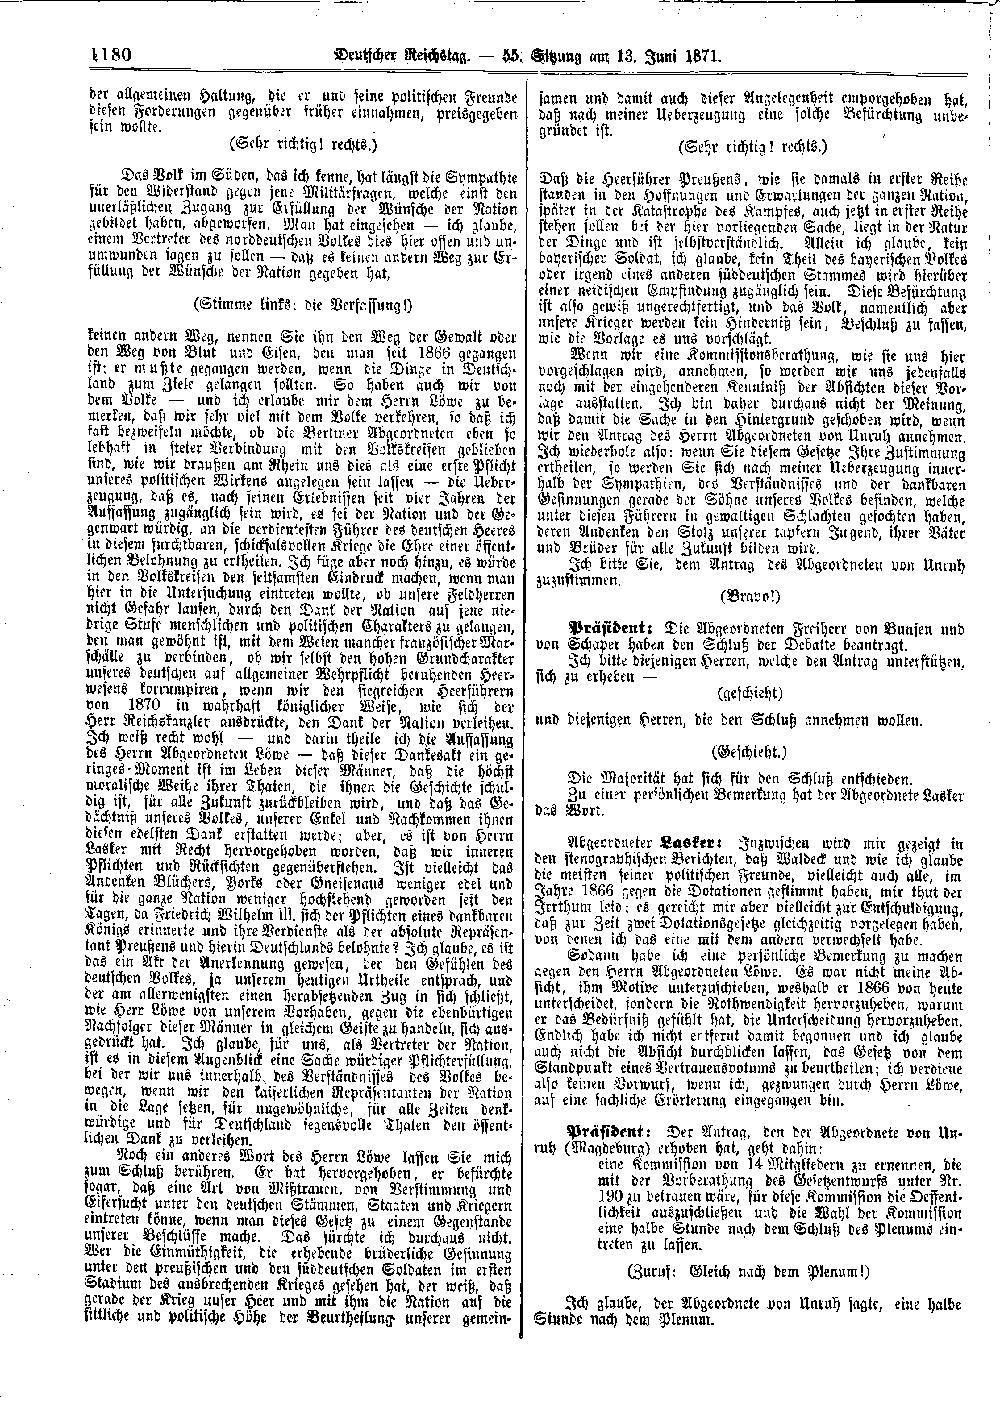 Scan of page 1180